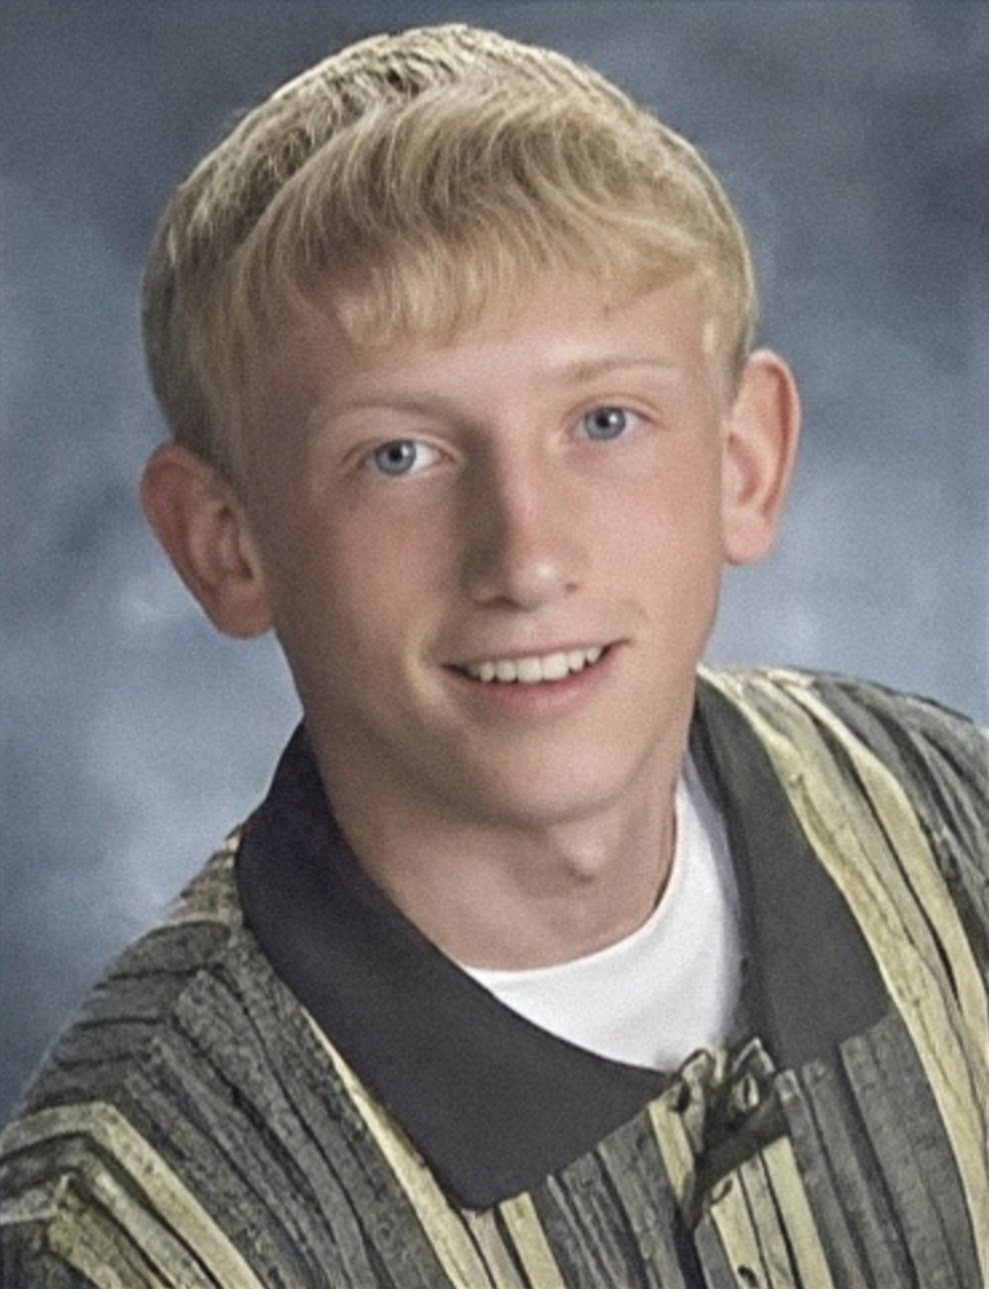 A restored picture of Branson Perry who vanished under mysterious circumstances from his residence at 304 West Oak Street in Skidmore, Missouri. Bringbransonhome 